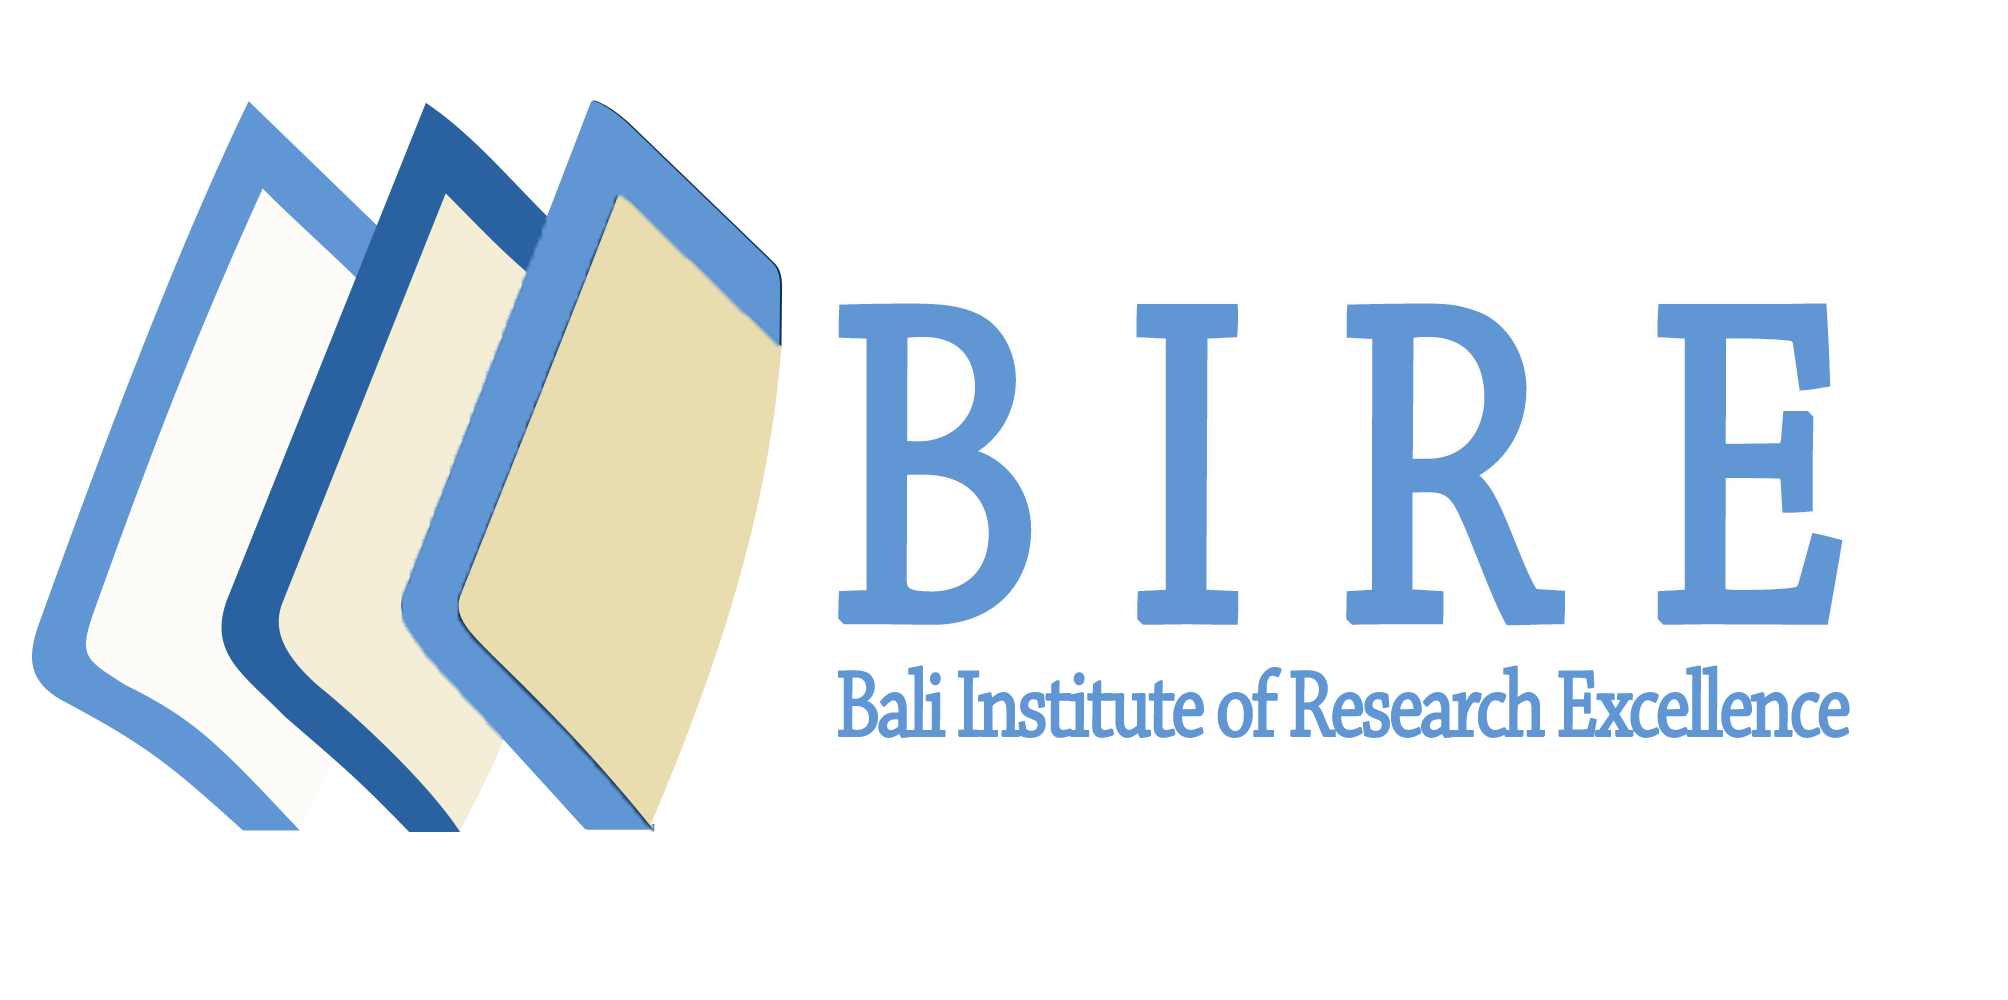 RBSEIT-2021 2021 International Conference on Current Research in Business Management, Social Sciences, Economics and Information Technology